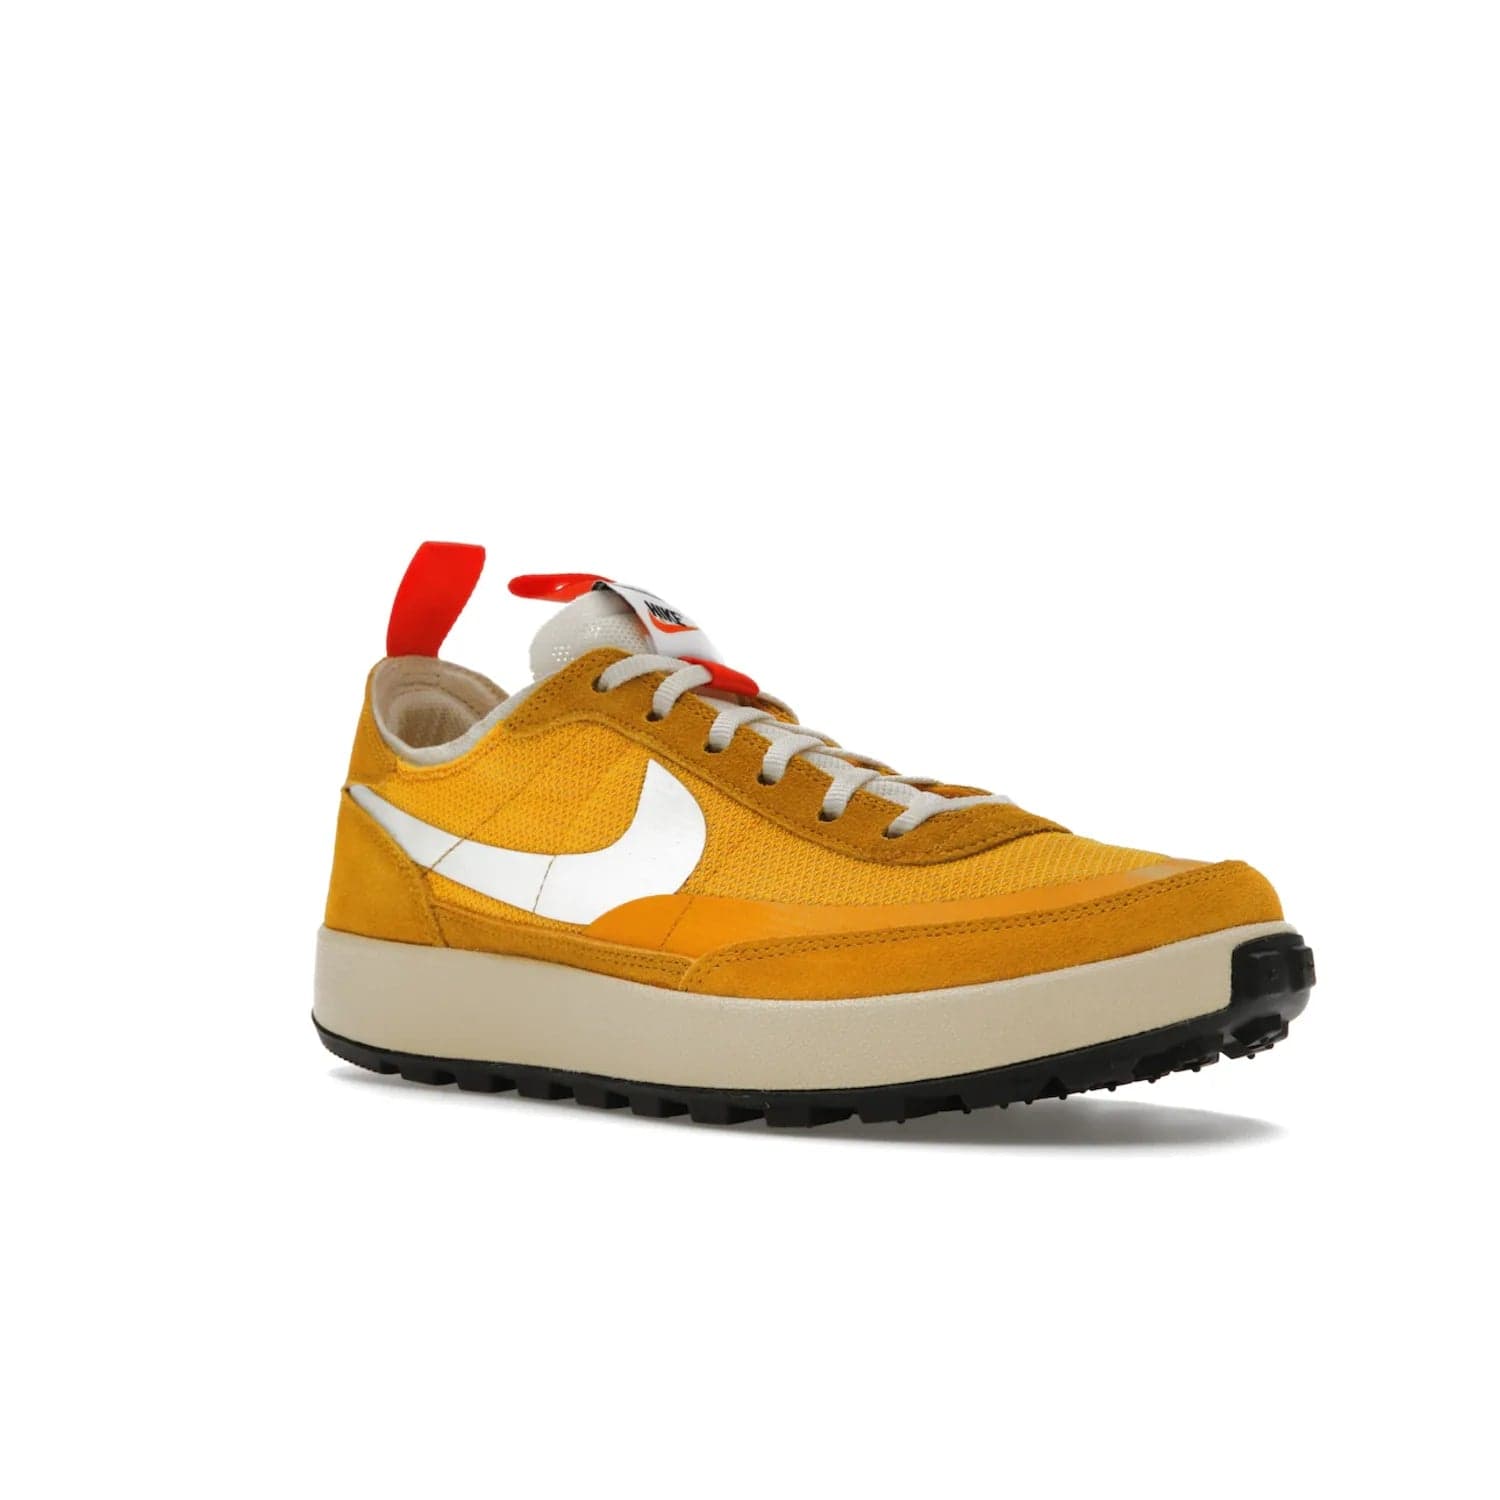 NikeCraft General Purpose Shoe Tom Sachs Archive Dark Sulfur - Image 5 - Only at www.BallersClubKickz.com - Collab between Nike & Tom Sachs. The NikeCraft General Purpose Shoe features dark sulfur mesh upper, suede overlays, contrasting white Swoosh and orange tabs. EVA cushioning & black waffle-traction rubber outsole ensures performance. Stylish & perfect for any occasion, the shoe released September 2, 2022.